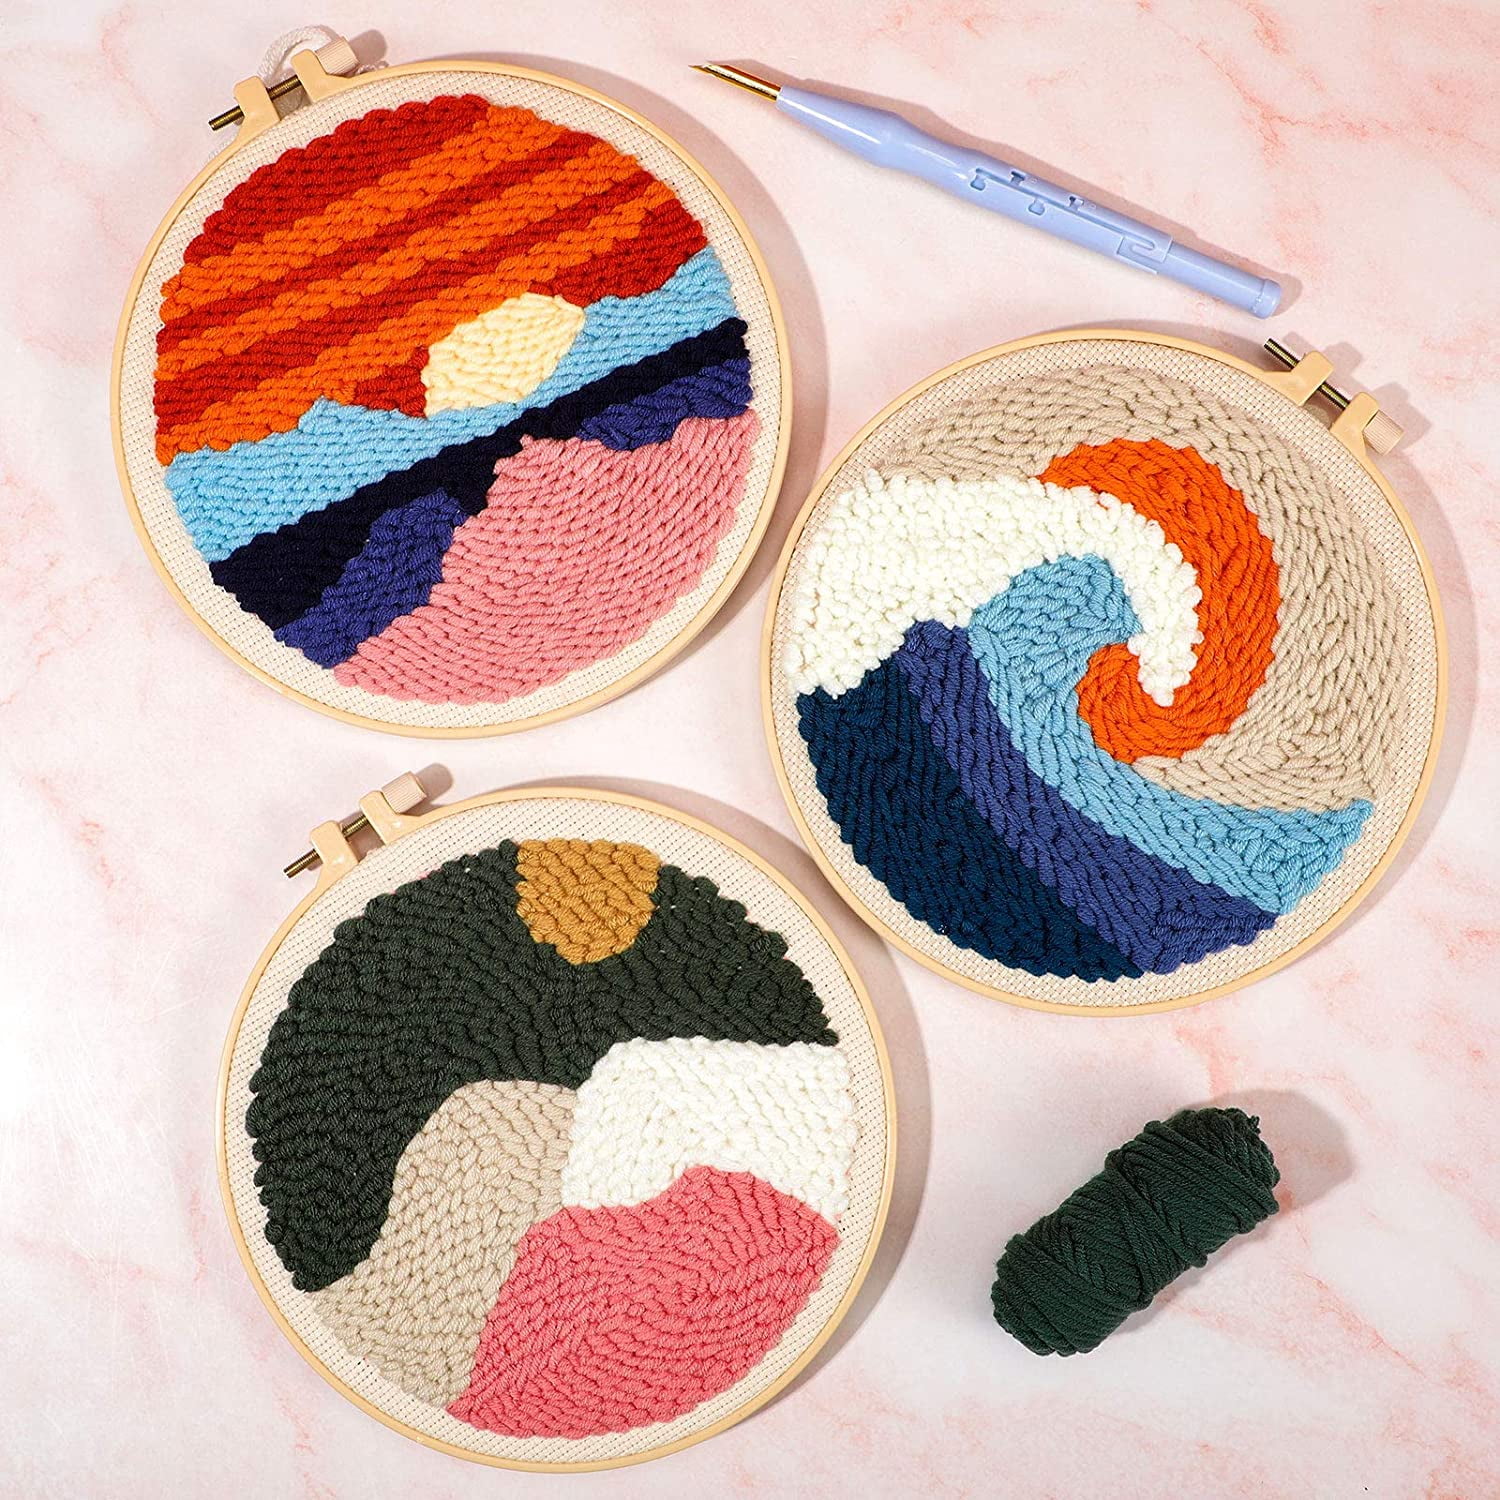 2 Pack Embroidery Starter Kit，Punch Needle Tool Threader Fabric Embroidery Hoop Yarn Rug Punch Needle Embroidery Beginner Kits with Instructions and Landscape Pattern for Adults Kids Beginner